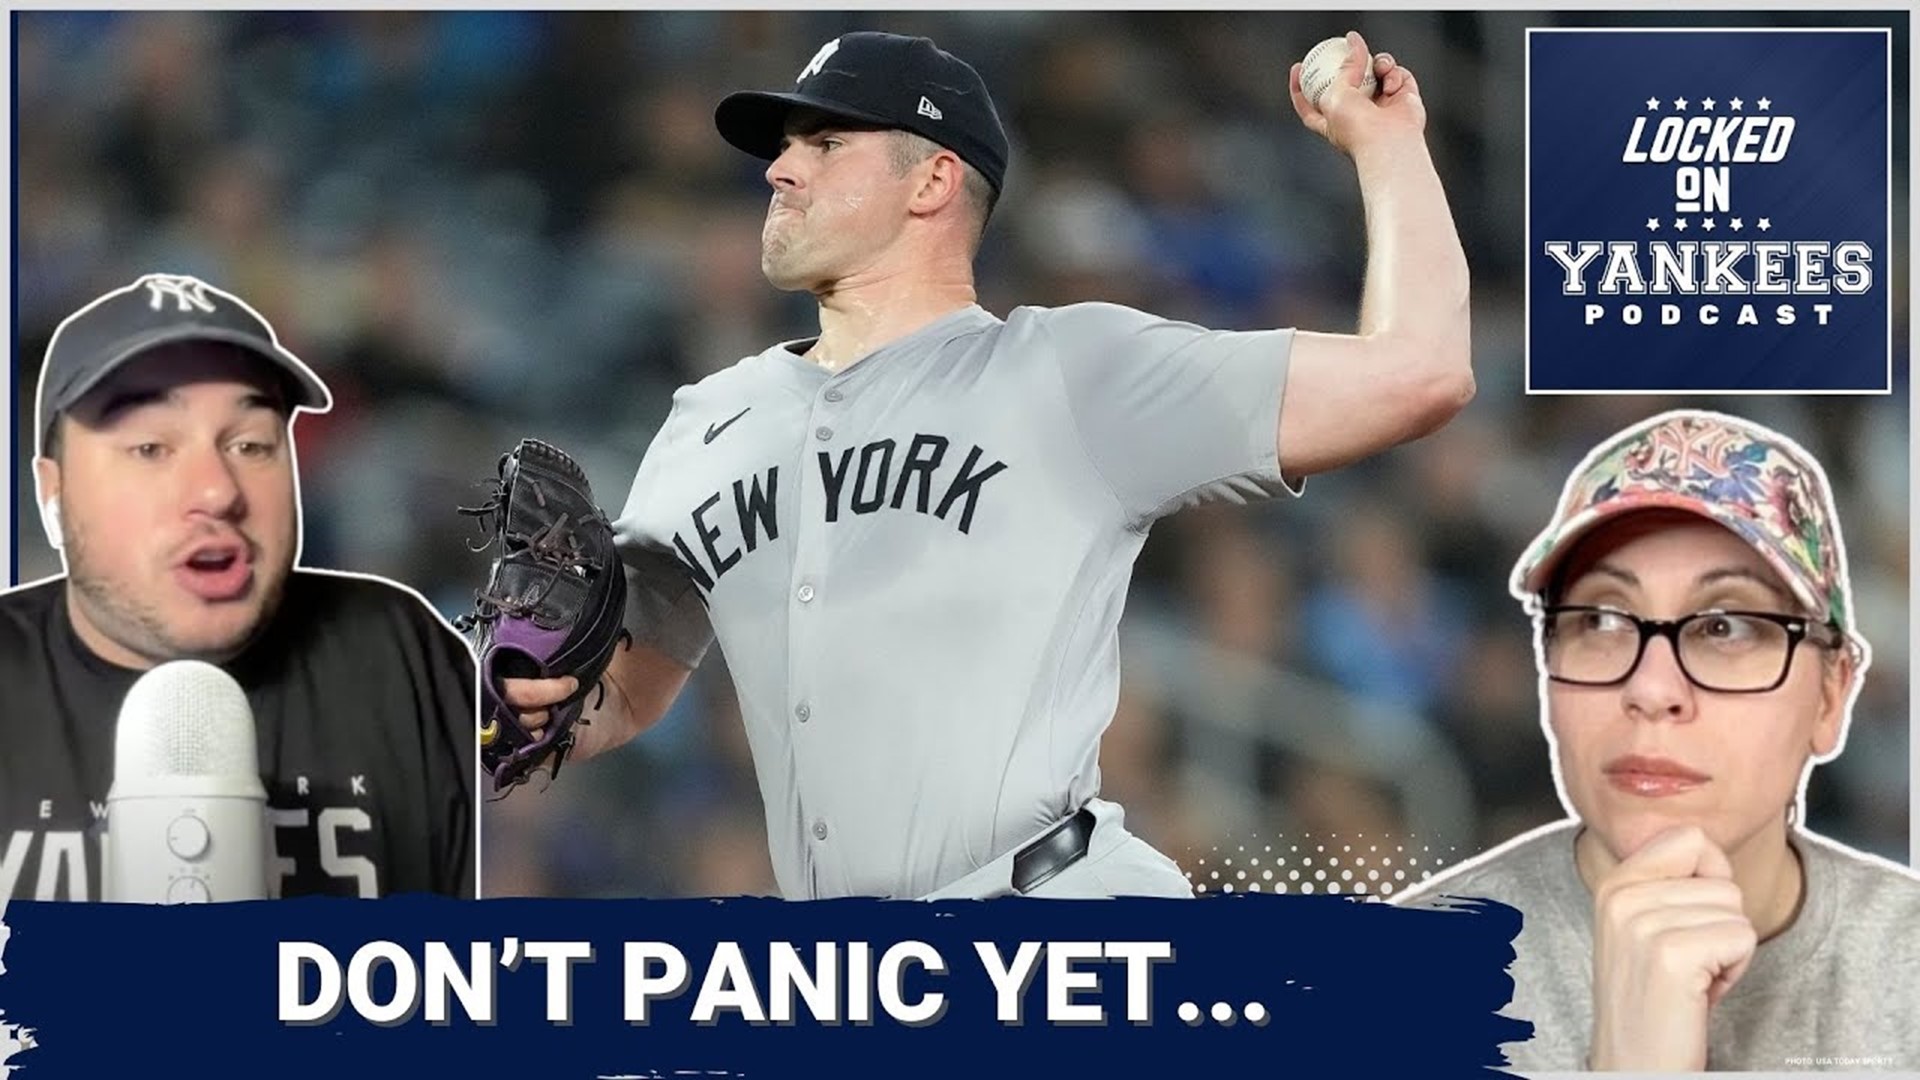 The New York Yankees have dropped three games in a row and have to avoid a sweep at the hands of the Toronto Blue Jays on Wednesday.